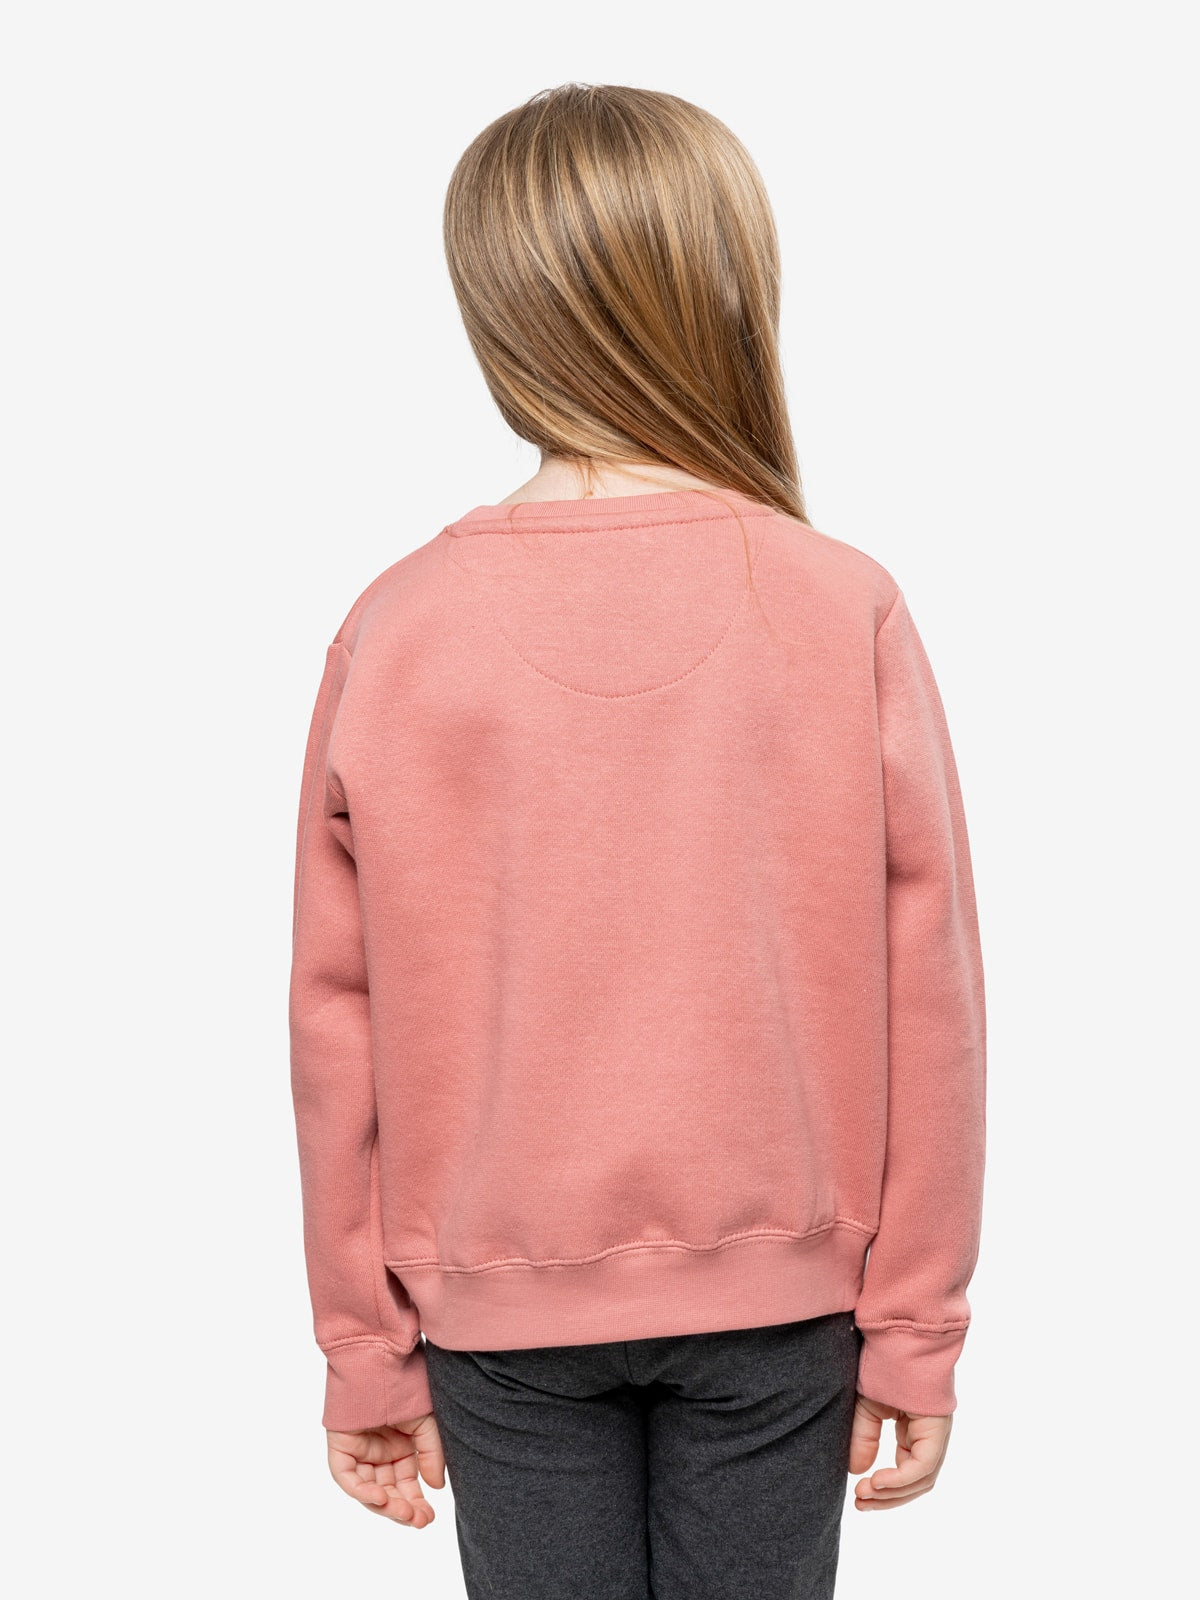 Insect Shield Youth Crew Sweatshirt